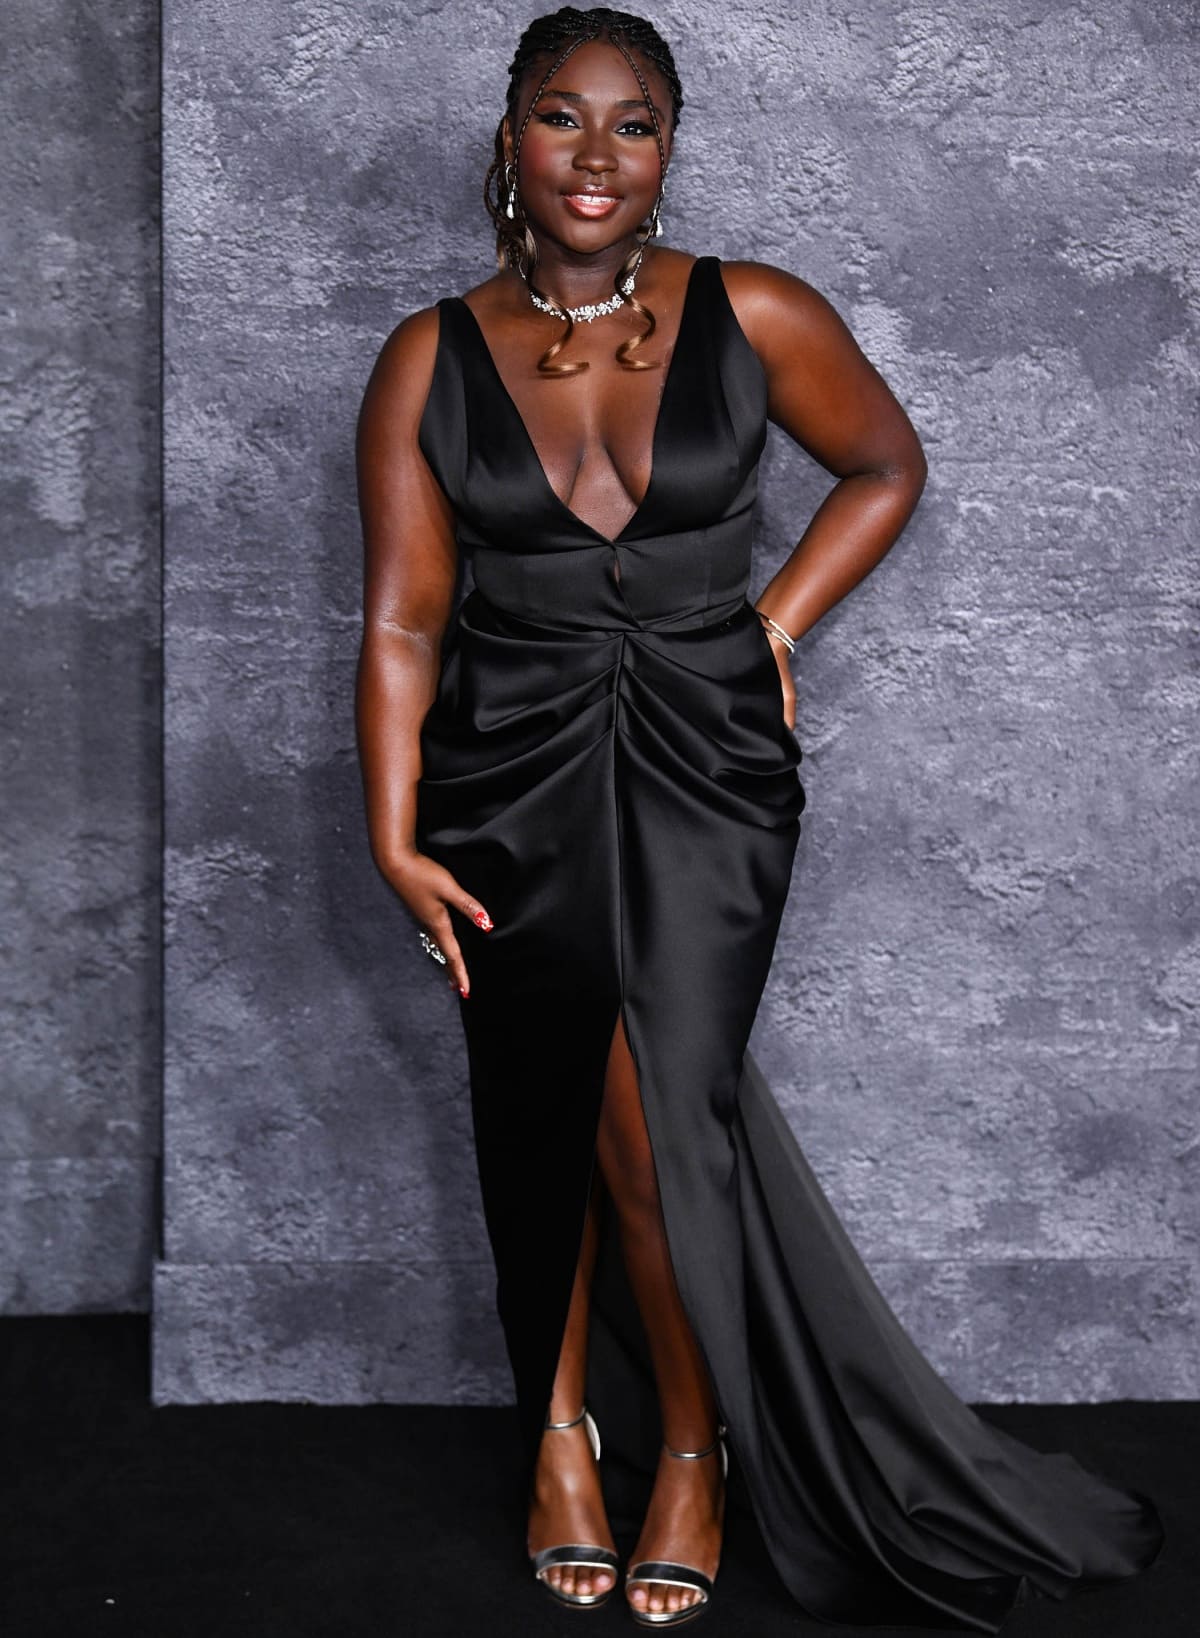 Lauryn Ajufo turning heads in a low-cut black satin gown and silver heels at the world premiere of Luther: The Fallen Sun